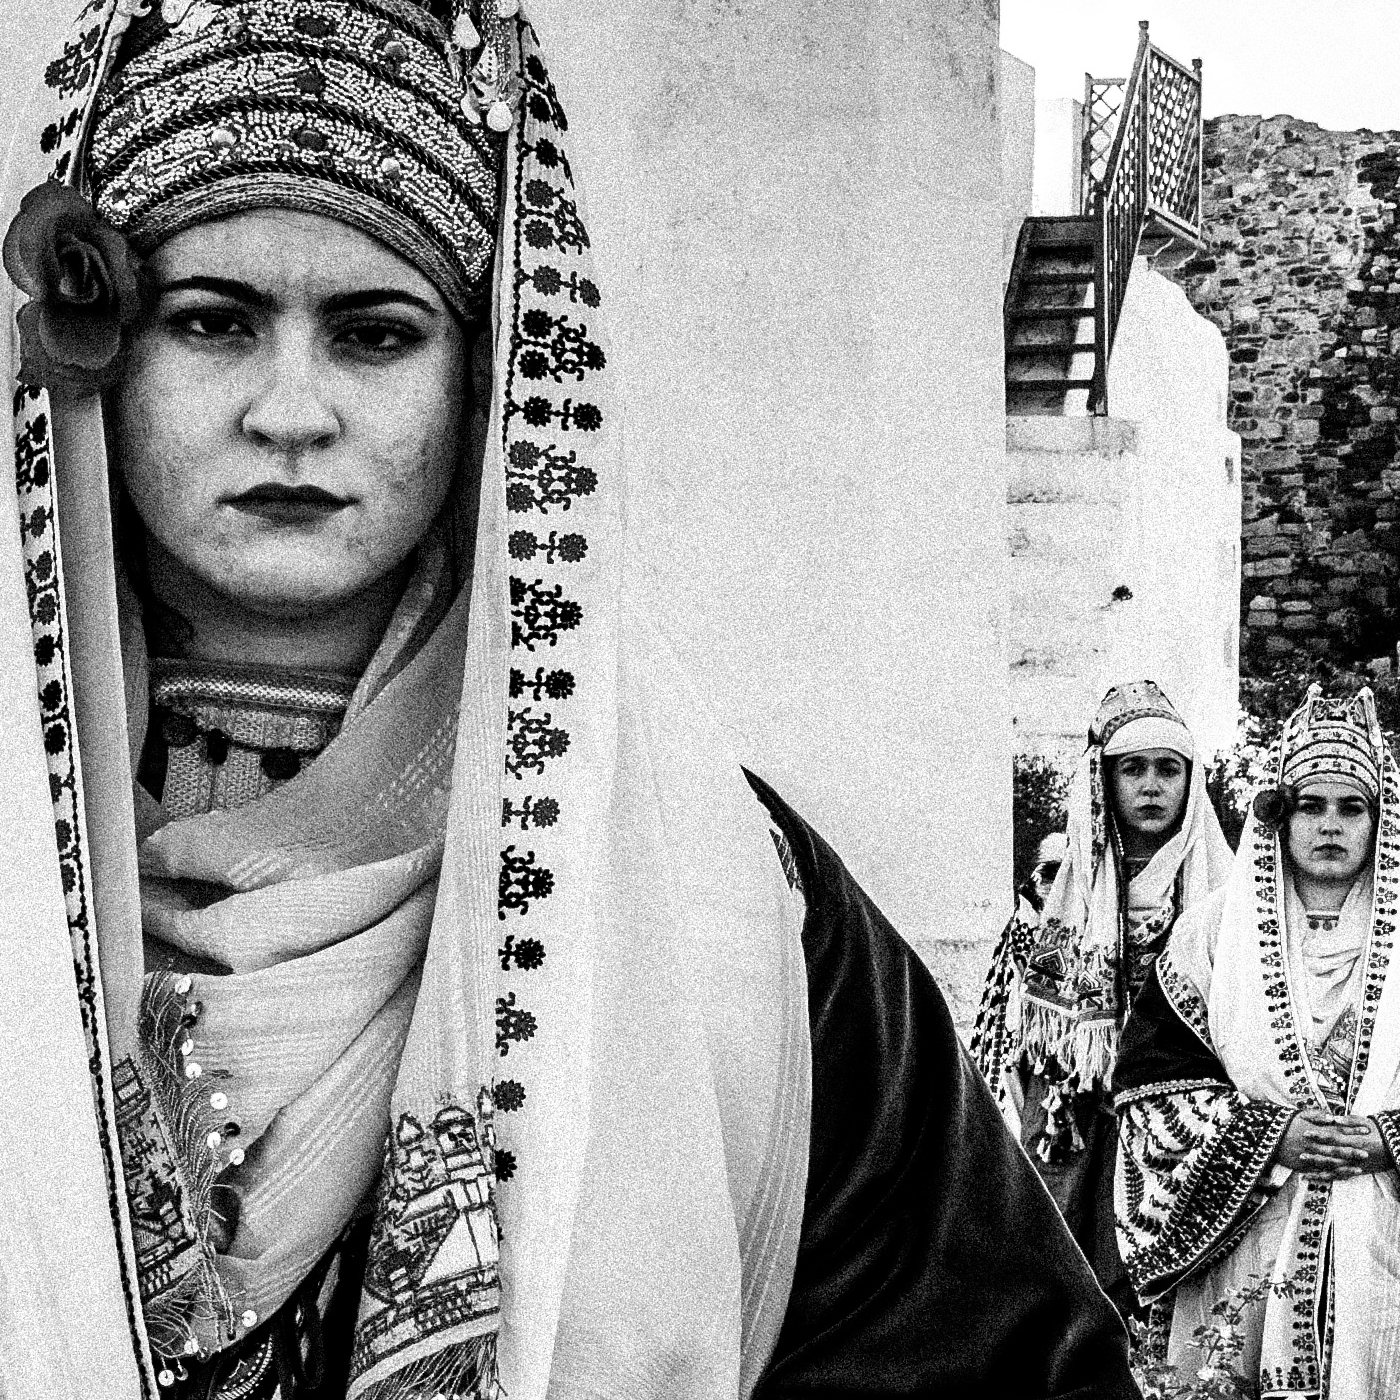 Black and White Photography Wall Art Greece | Costume of Astypalaea inside the castle Dodecanese Greece by George Tatakis - detailed view